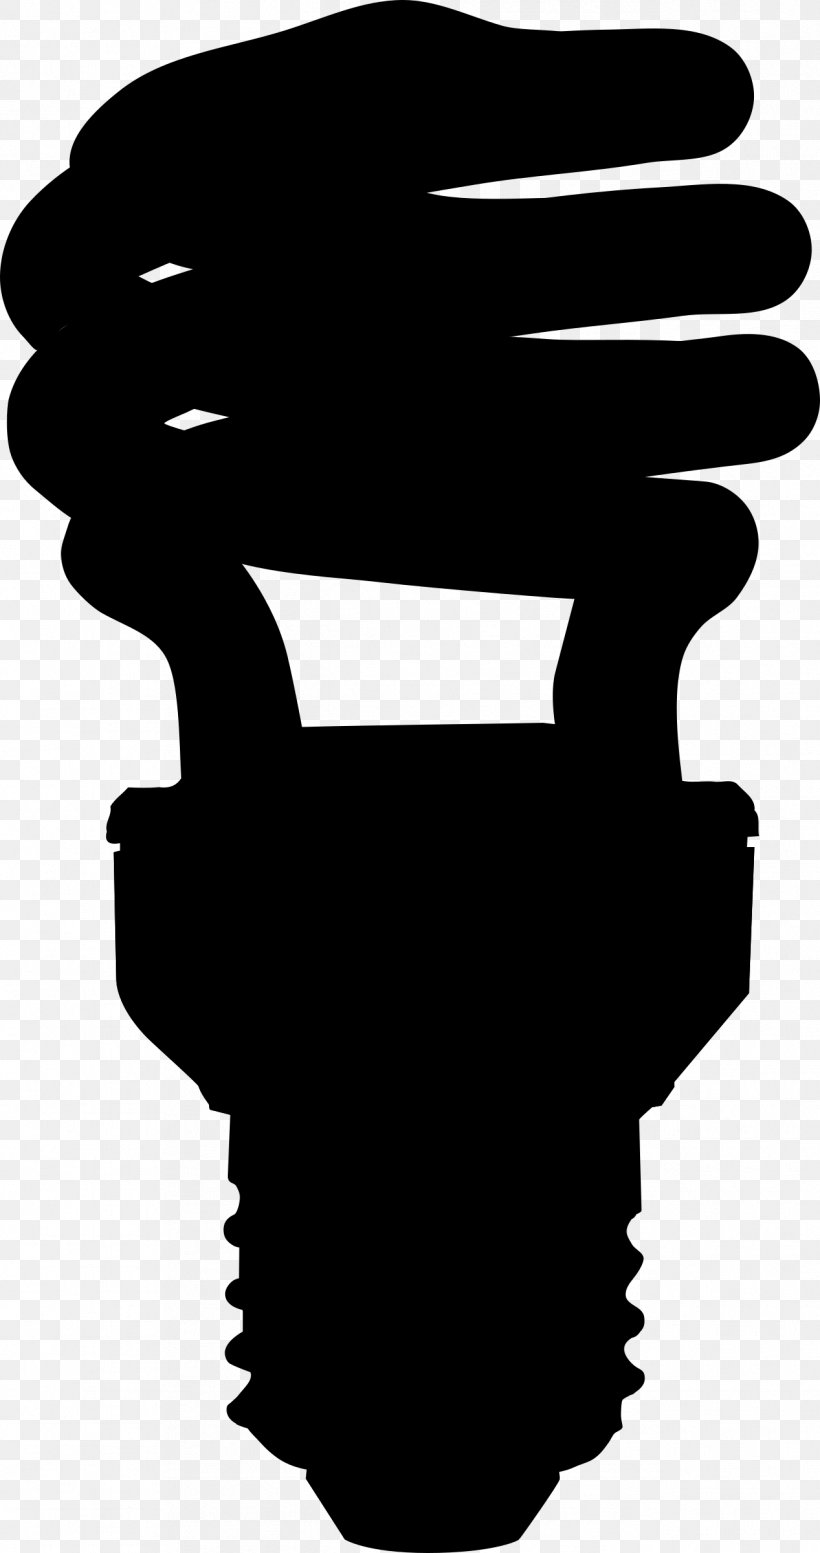 Incandescent Light Bulb Compact Fluorescent Lamp Clip Art, PNG, 1267x2400px, Light, Black, Black And White, Compact Fluorescent Lamp, Efficient Energy Use Download Free